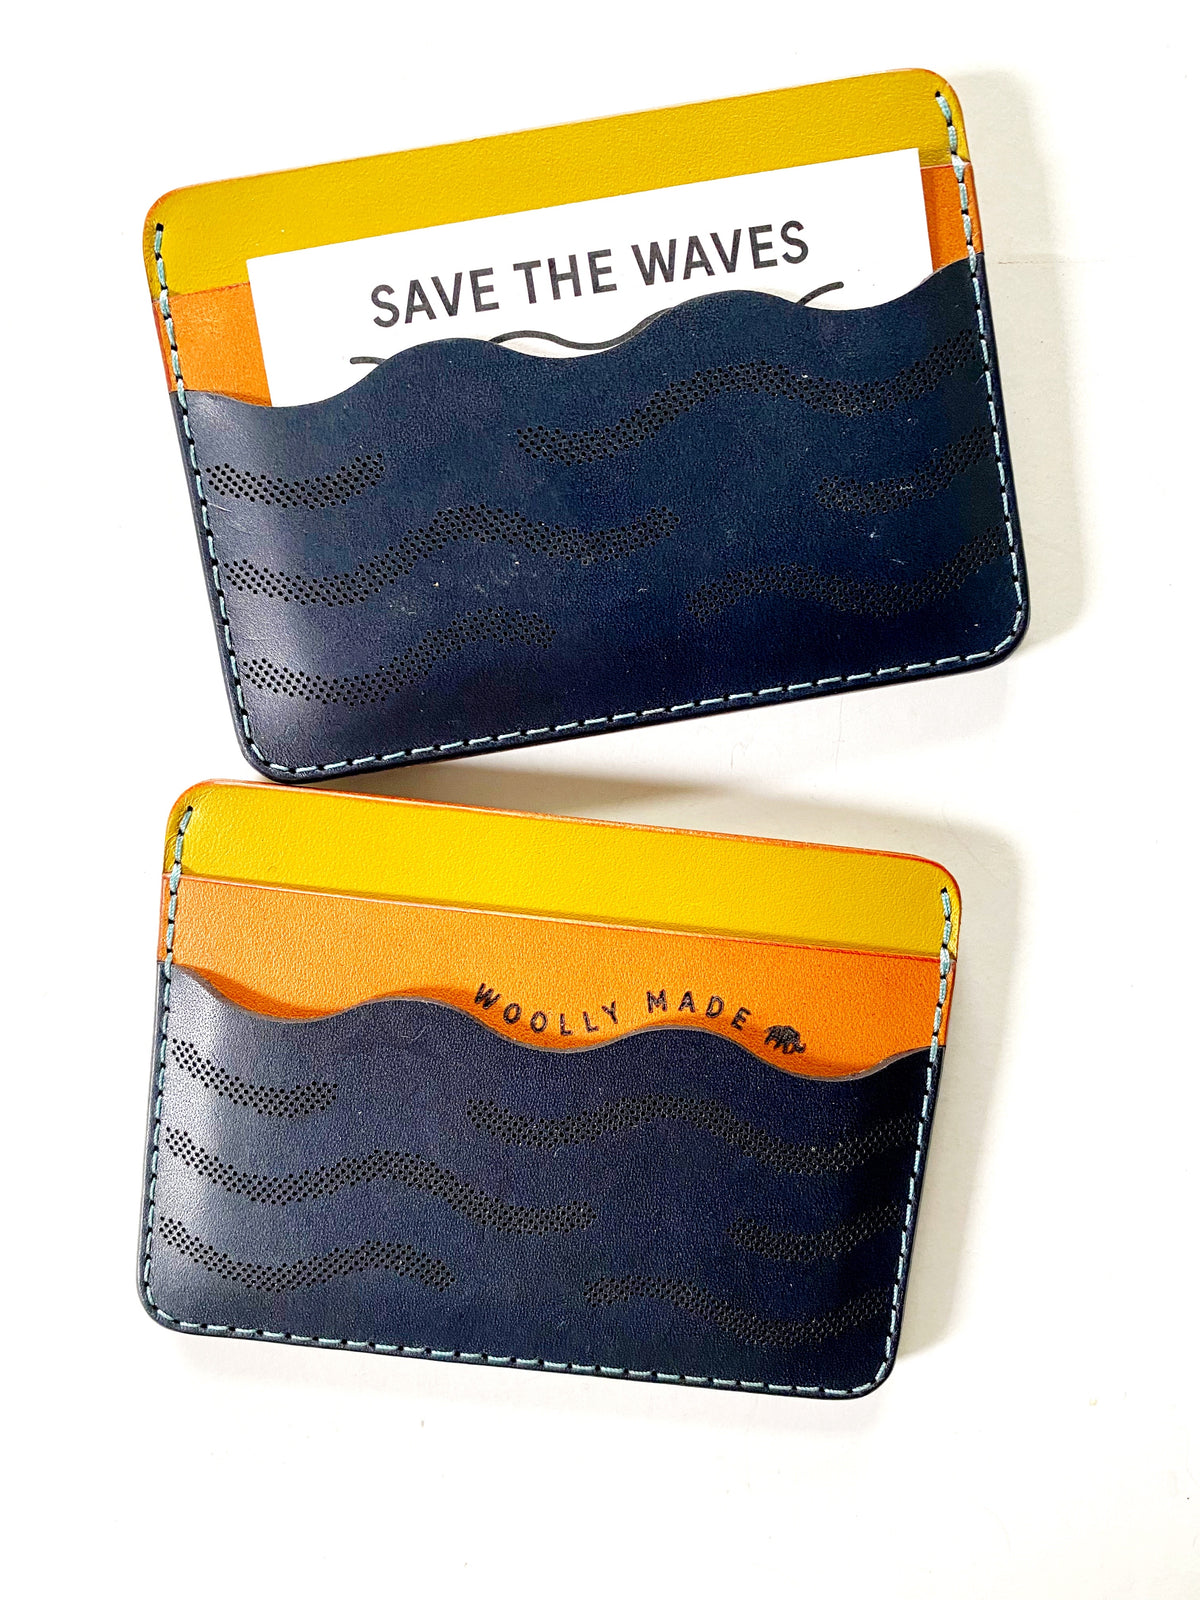 Woolly Made: Save the Waves Half Wallet